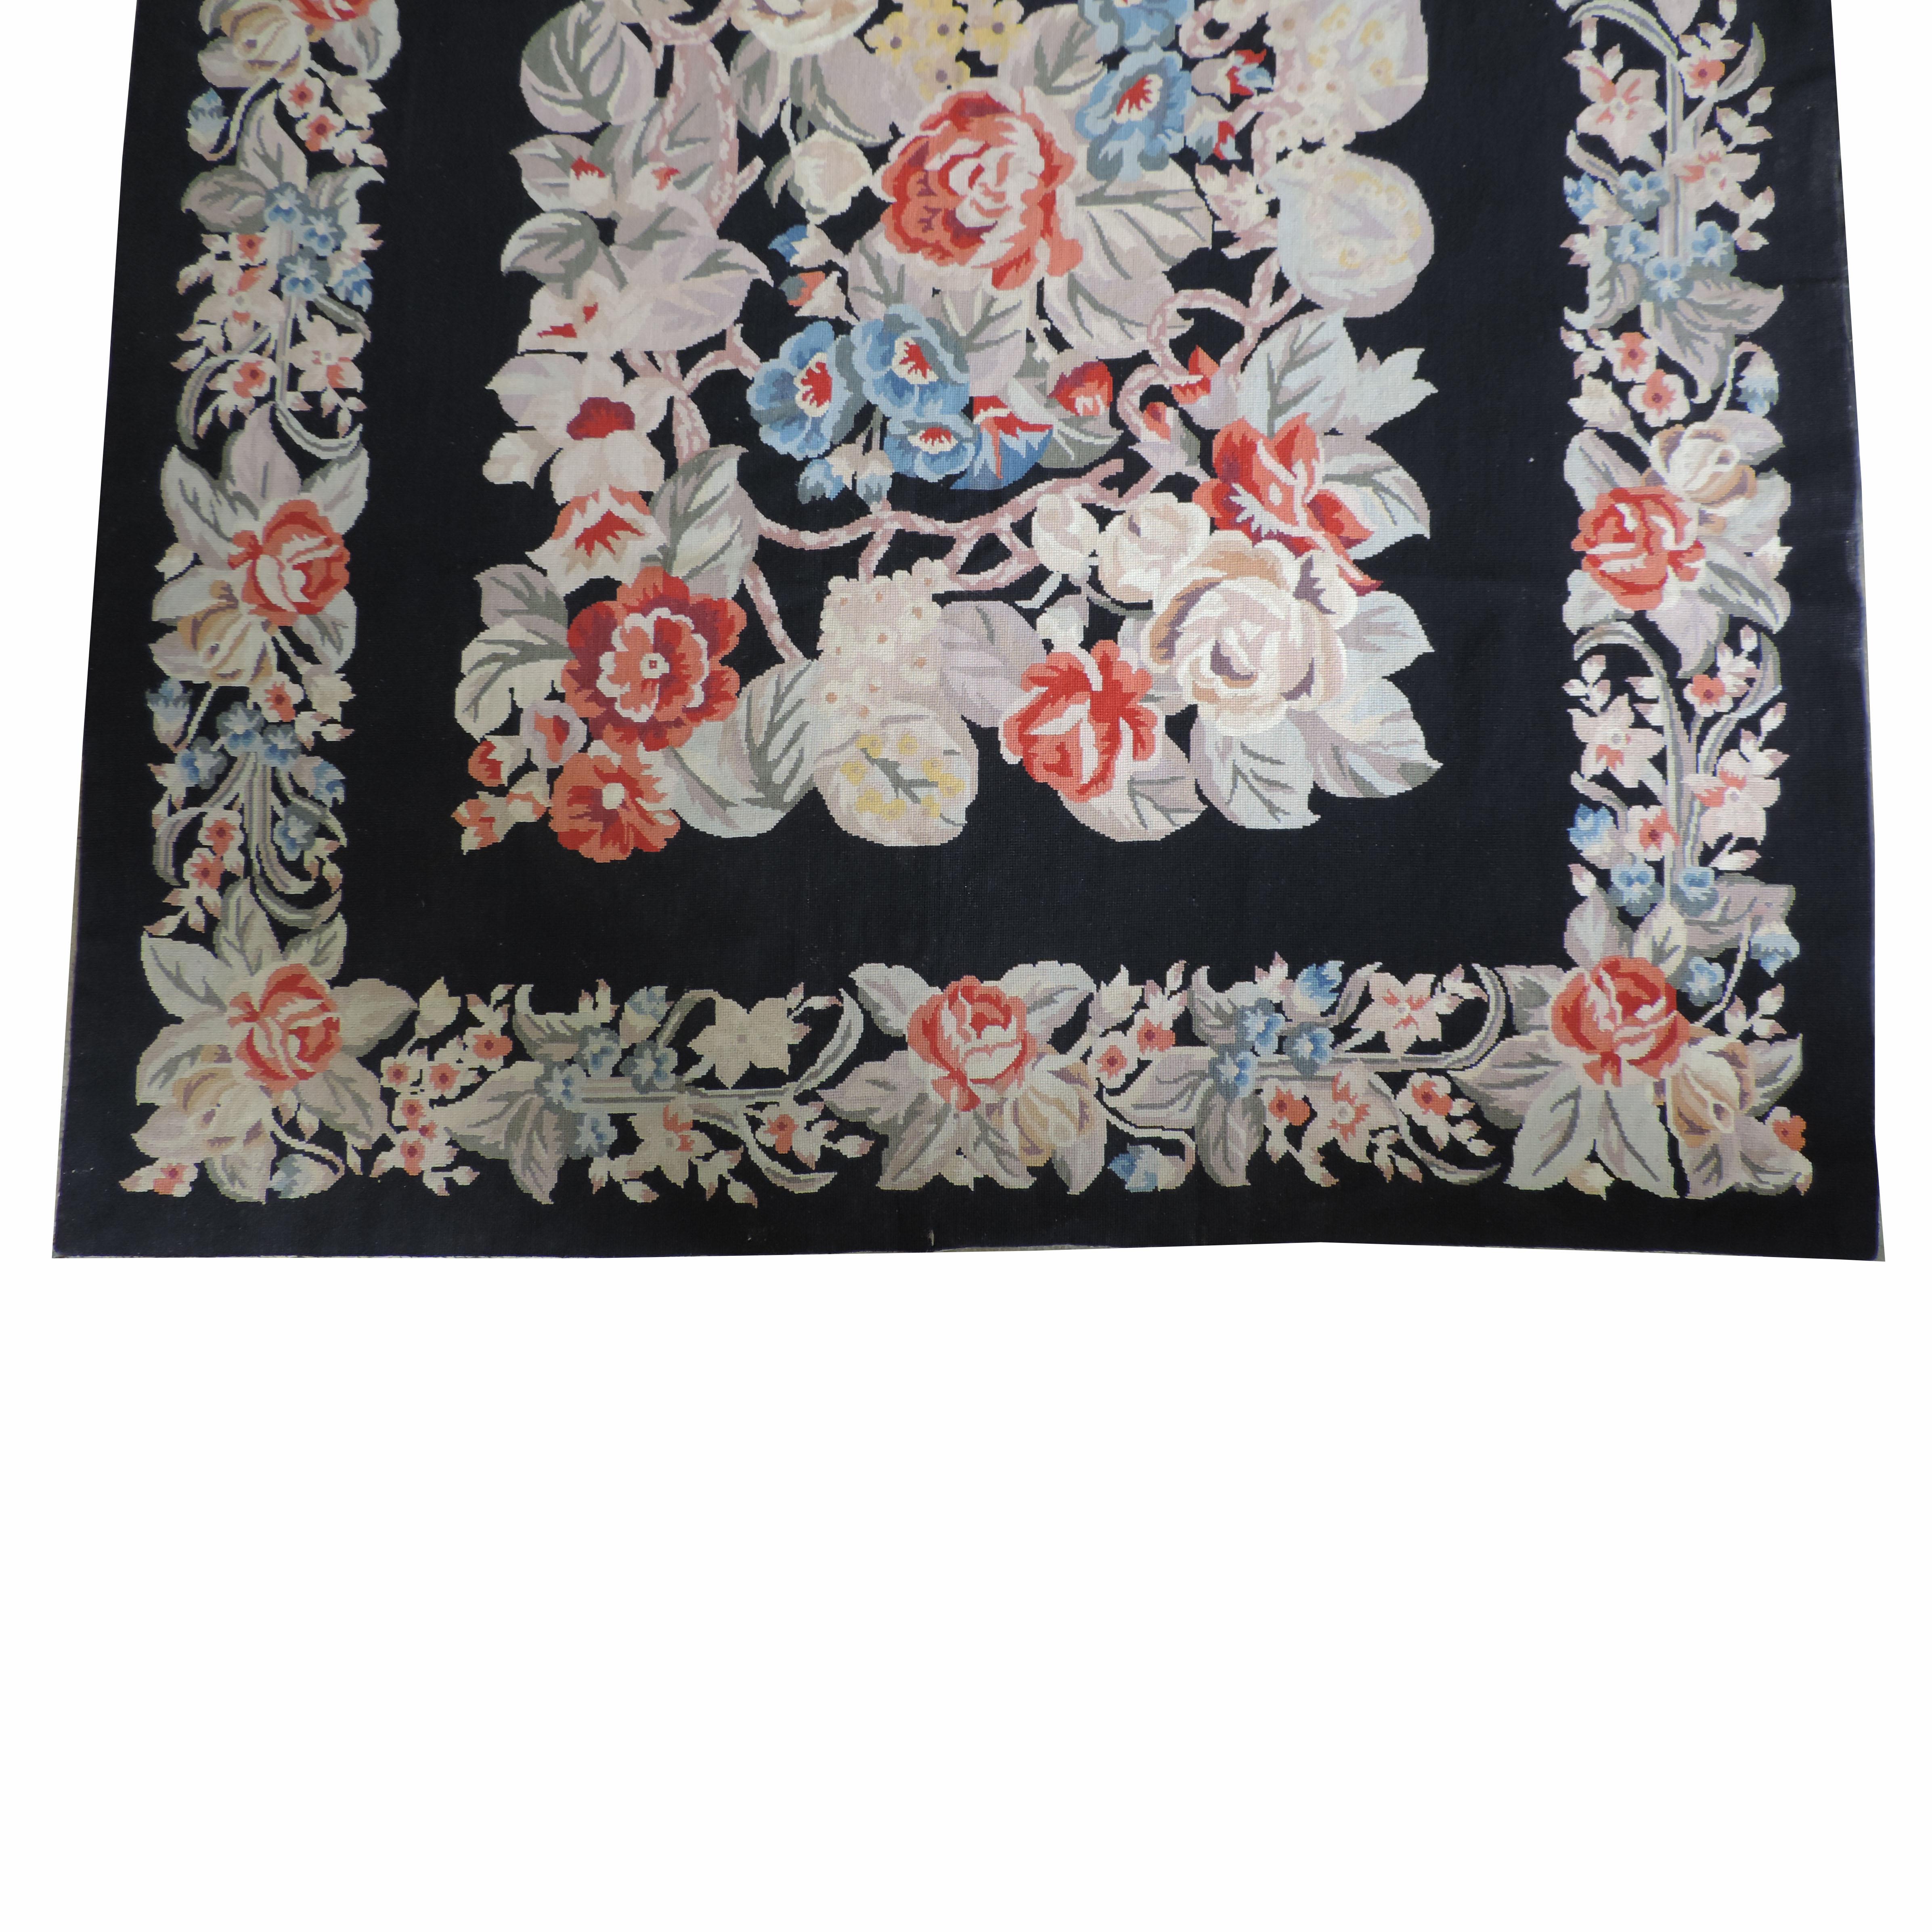 Flowers and Roses Aubusson Tapestry/Carpet, Europe, 1930s For Sale 1